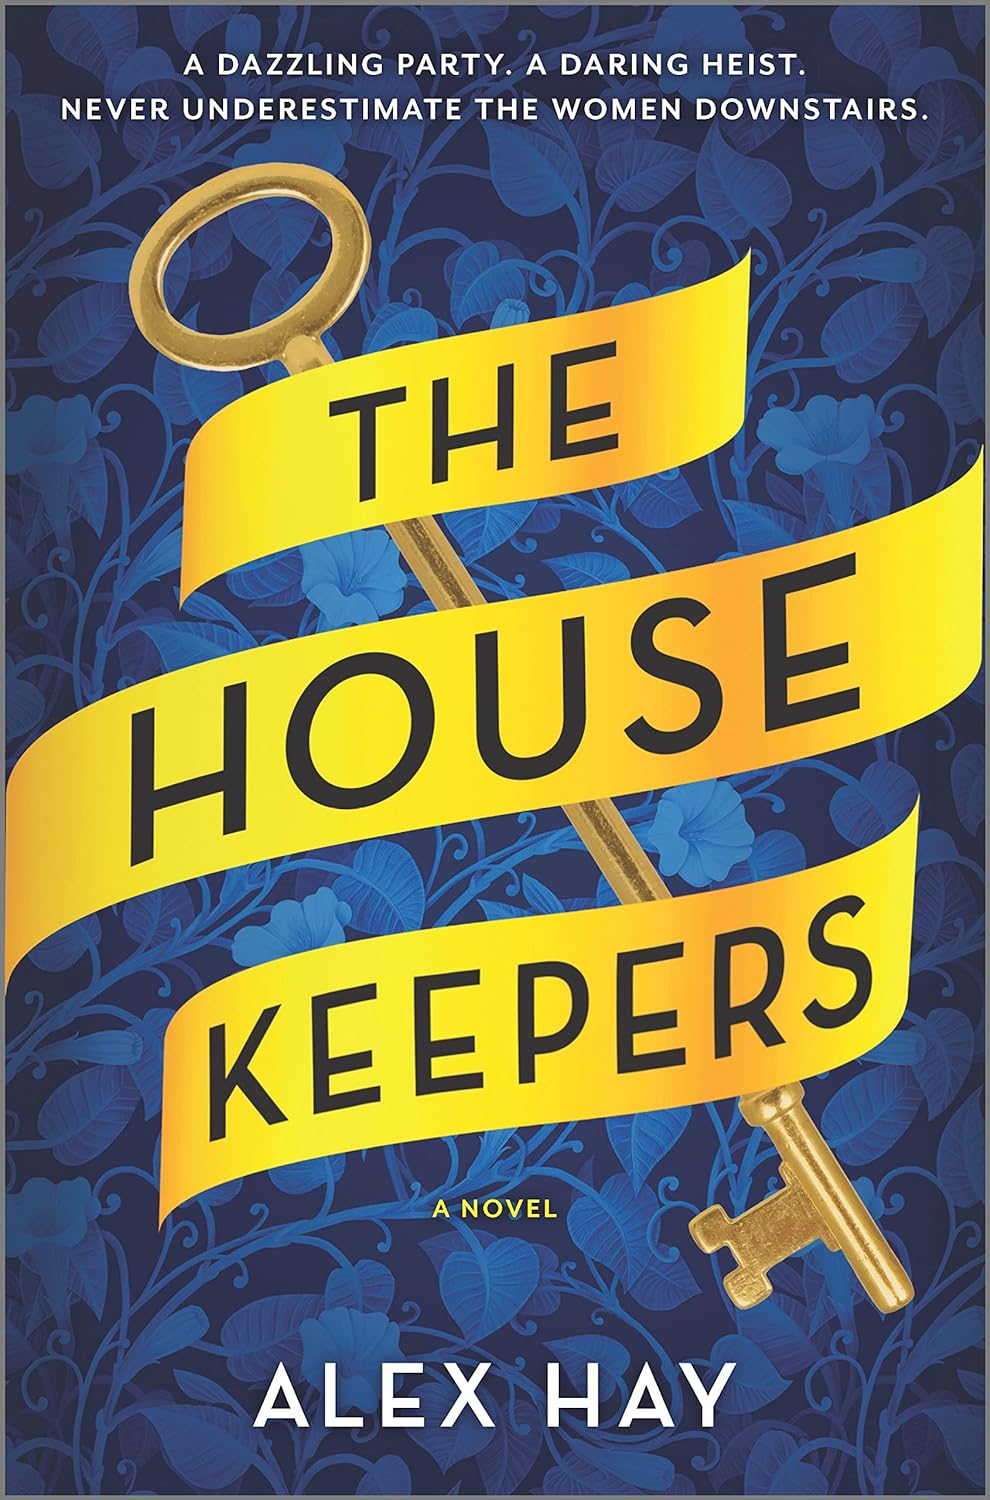 The Housekeepers (Original) - by Alex Hay (Hardcover)